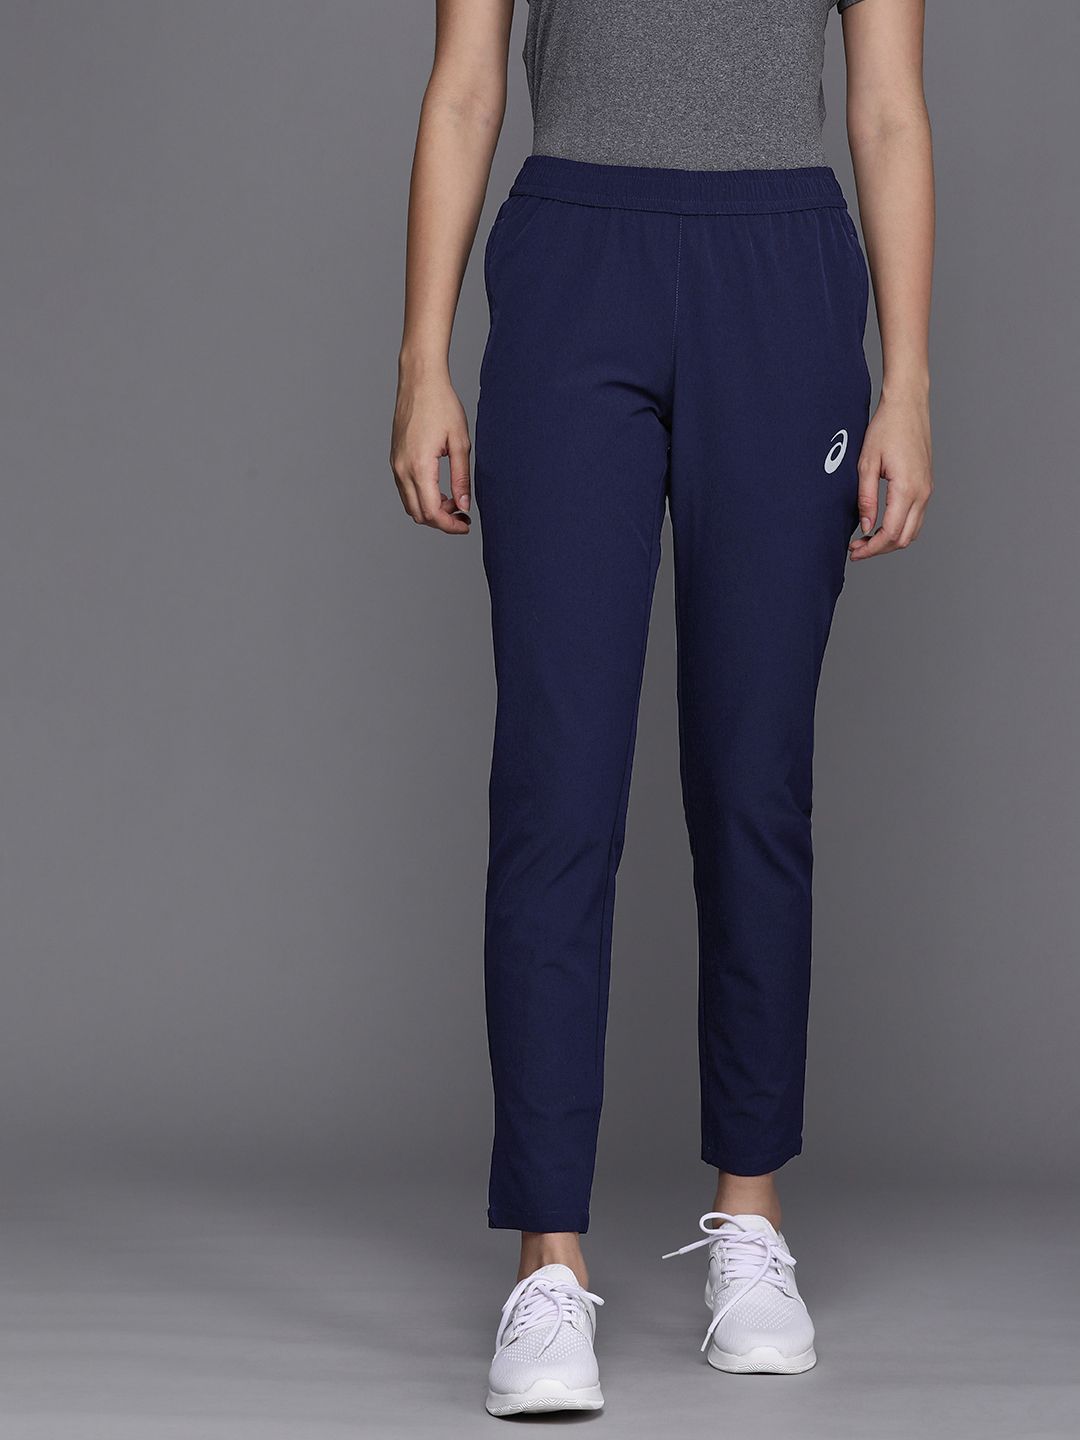 ASICS Women Navy Blue Solid Reflective Woven Regular Fit Track Pants Price in India